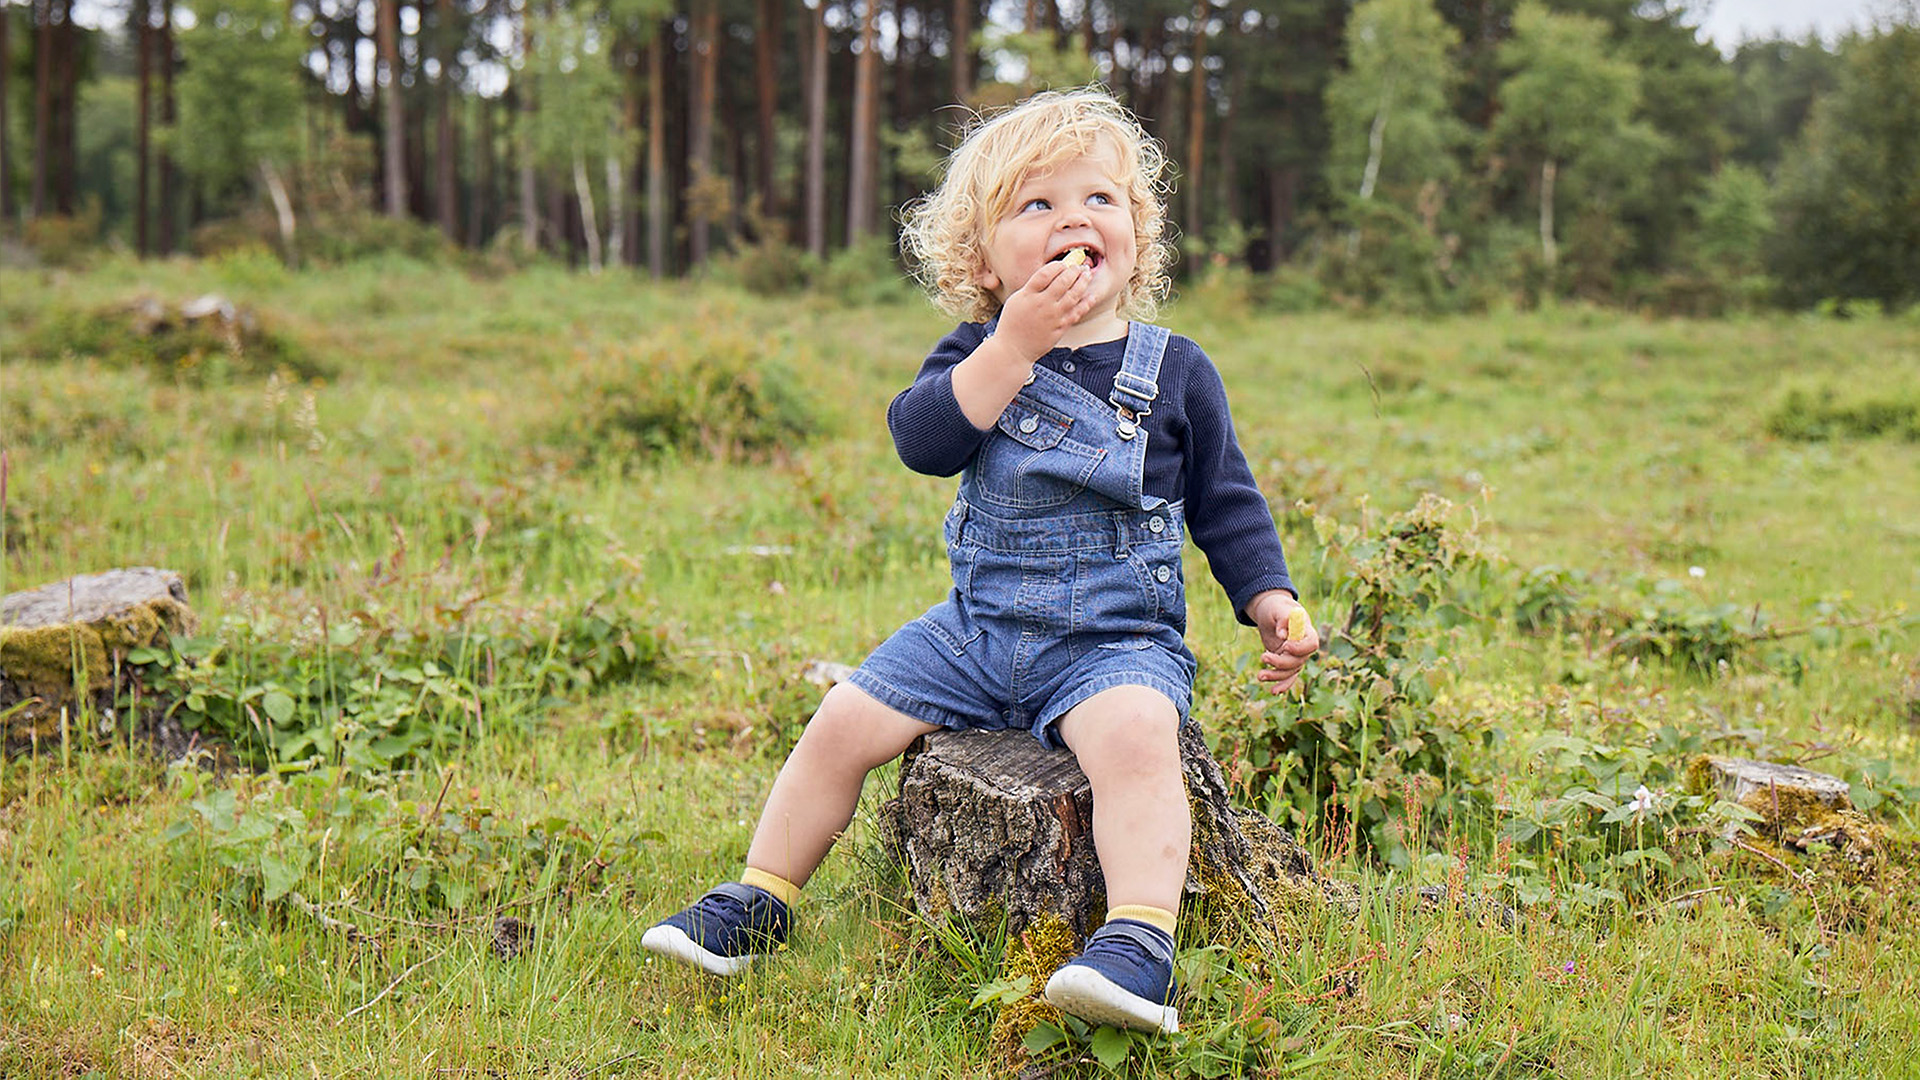 Boy toddler eating Organix snack in the woods